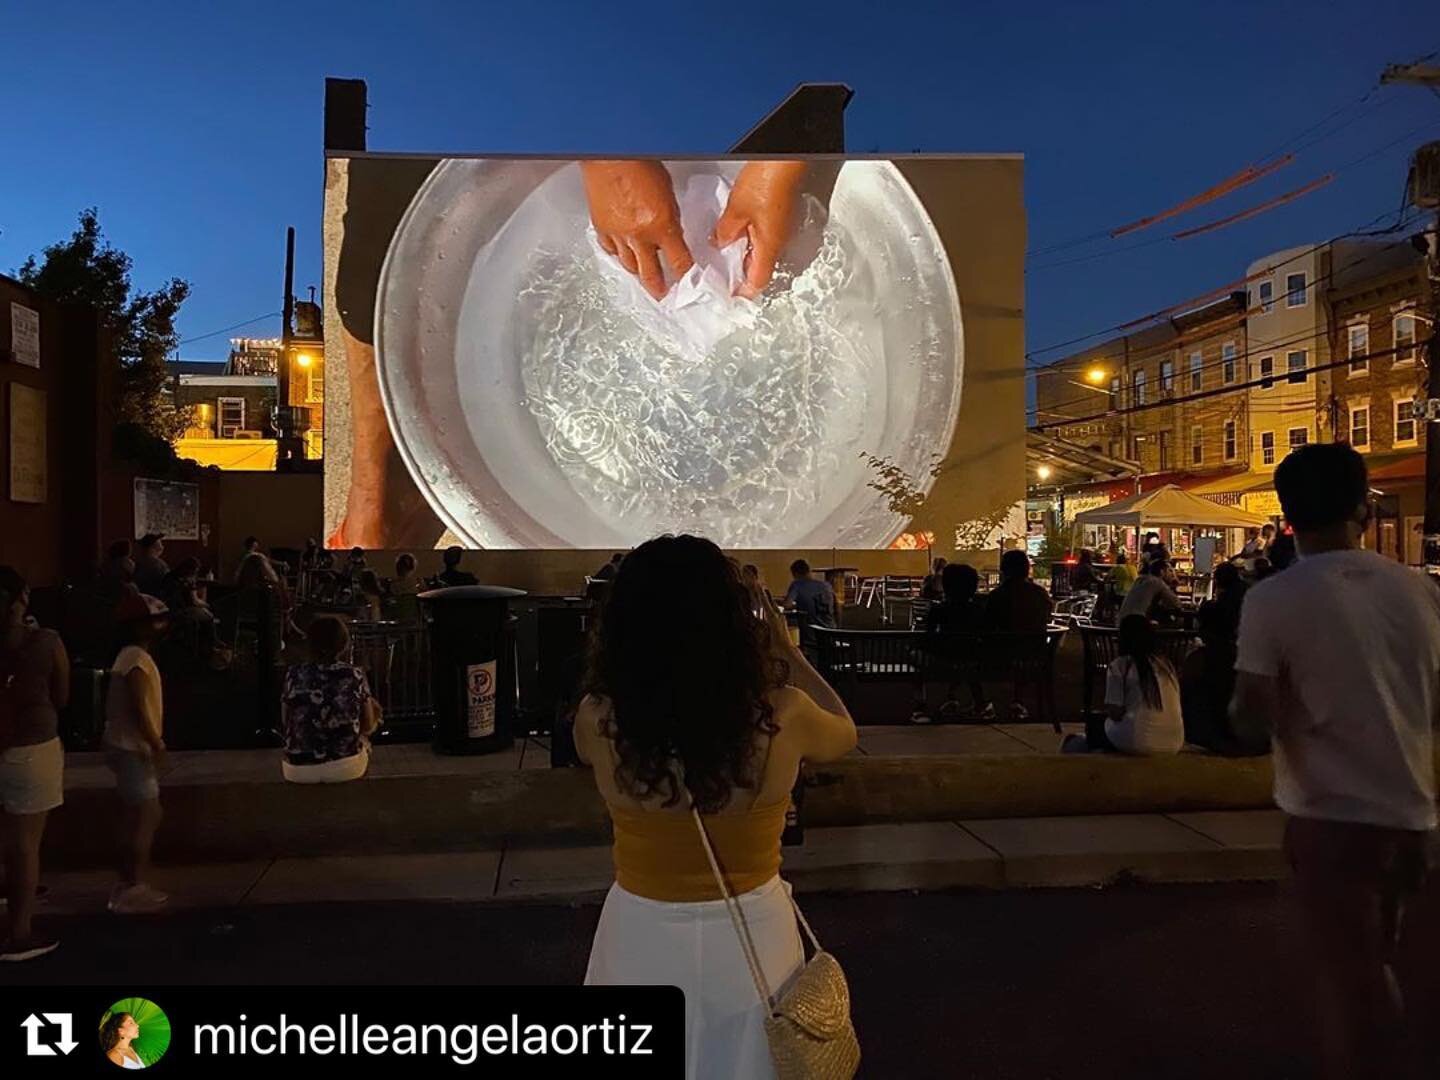 V&iacute;a @michelleangelaortiz 
・・・
Today is my mother&rsquo;s birthday. Last night, I was able to project her hands as a symbol of cleansing in our neighborhood. Her hands were projected onto the the former #Rizzo wall. Her hands that put in 25 yea